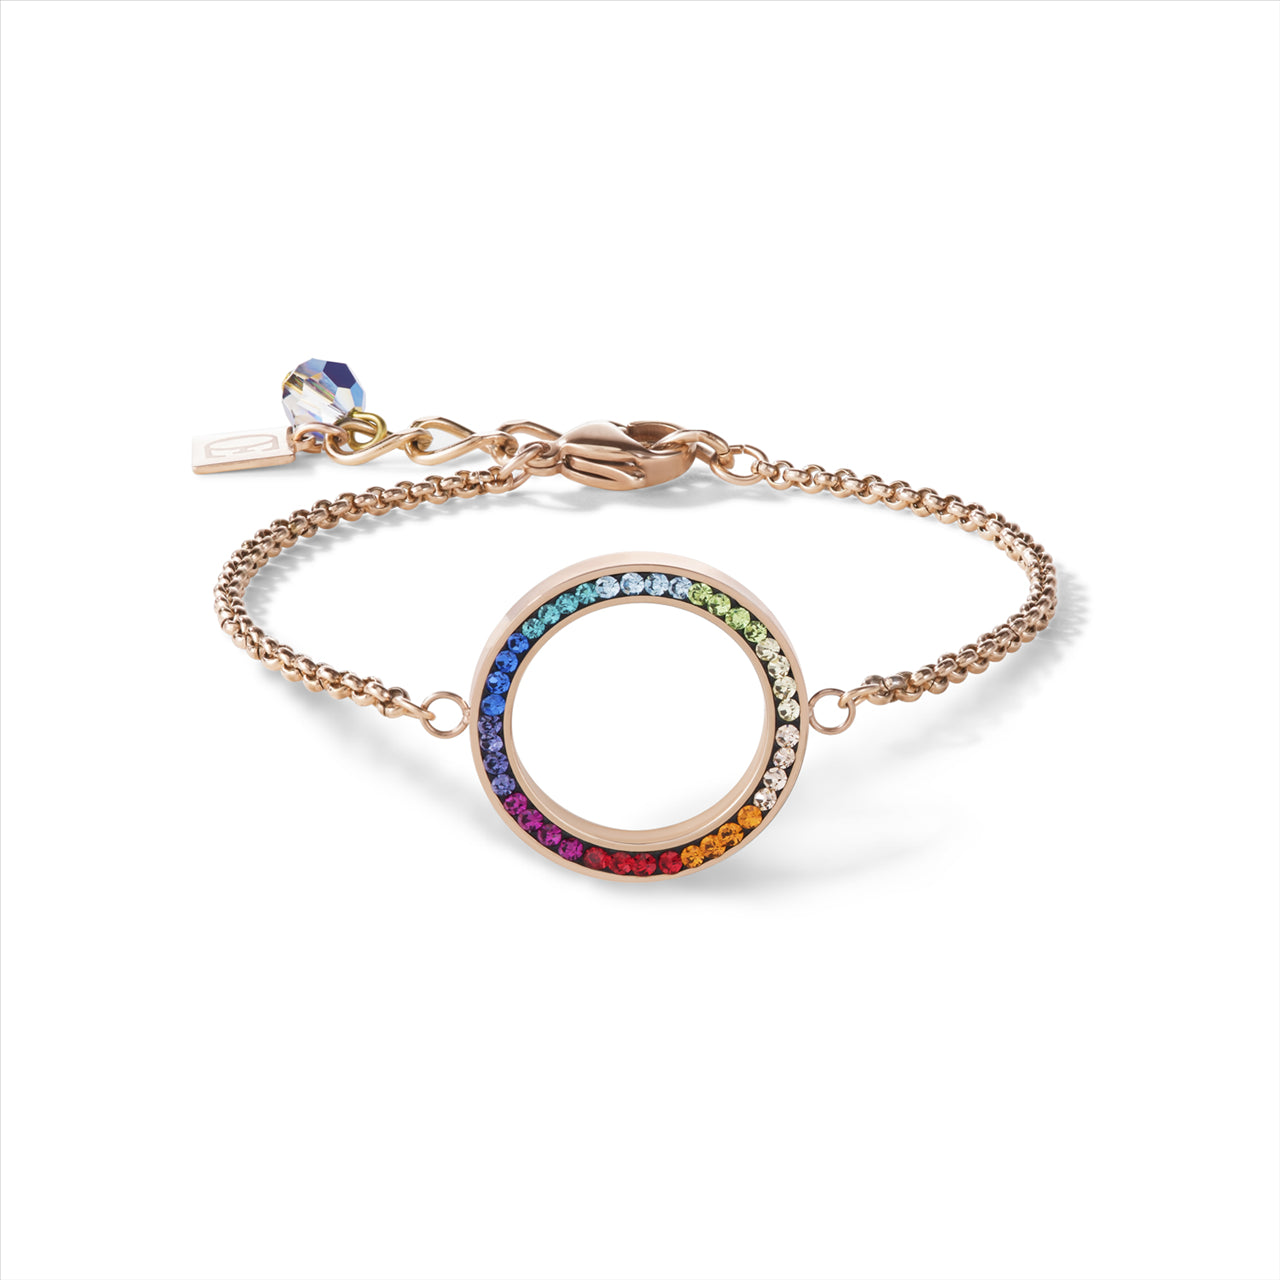 Bracelet - CDL - rose gold stainless steel chain with multi coloured swarovski crystal pendant